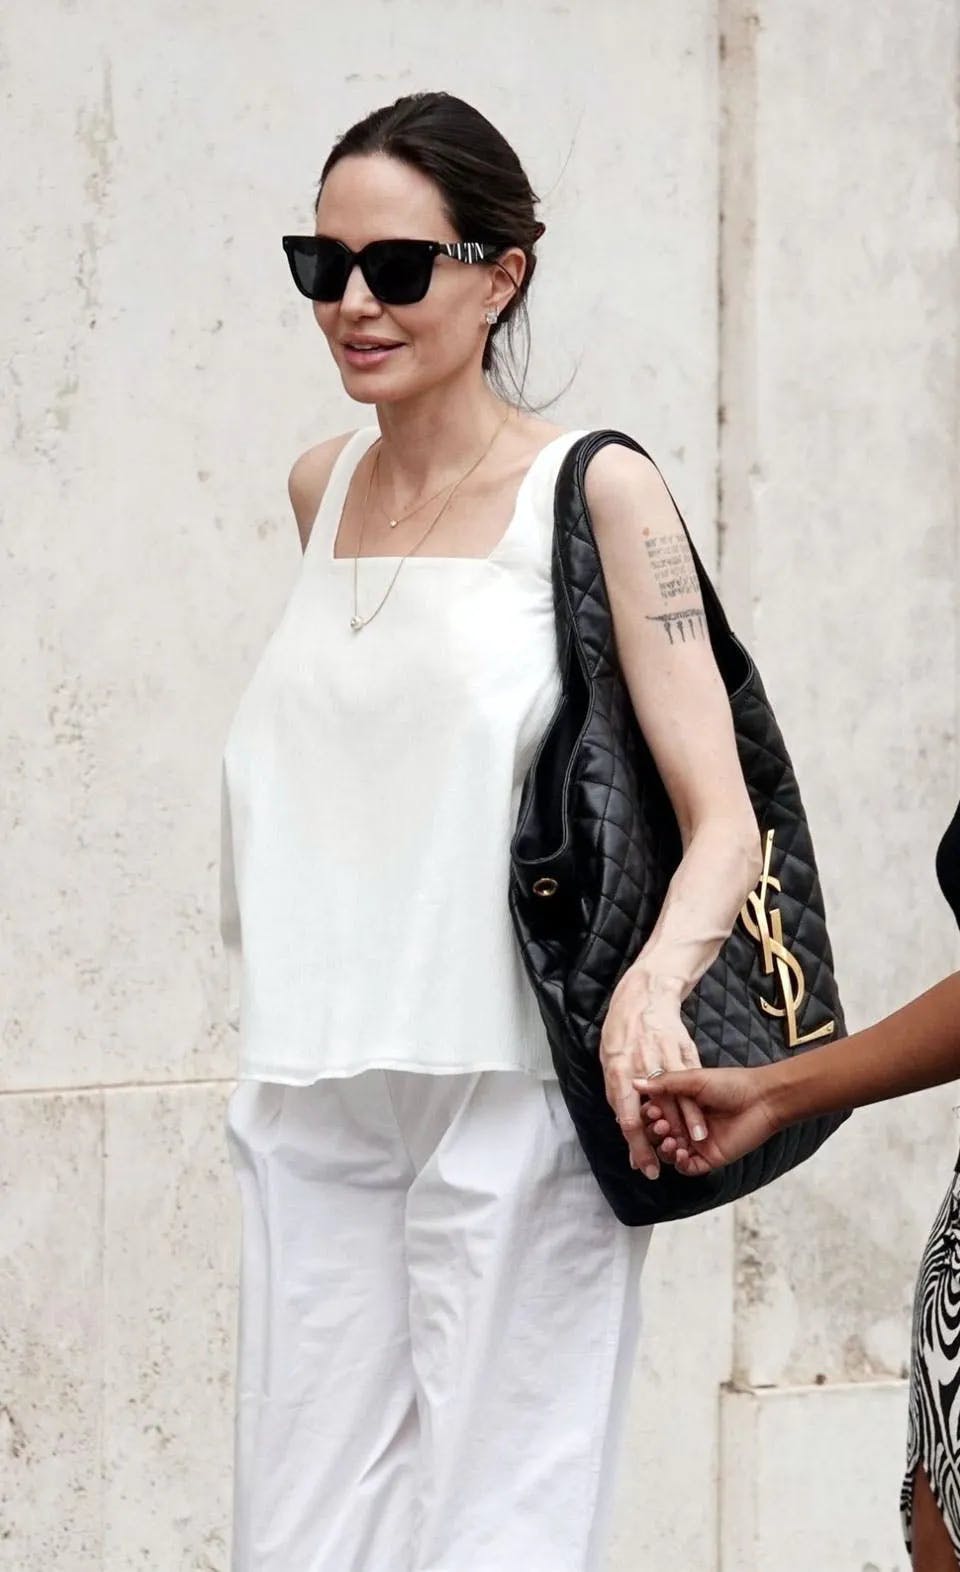 angelina jolie in all white carrying a black saint lauren tbag